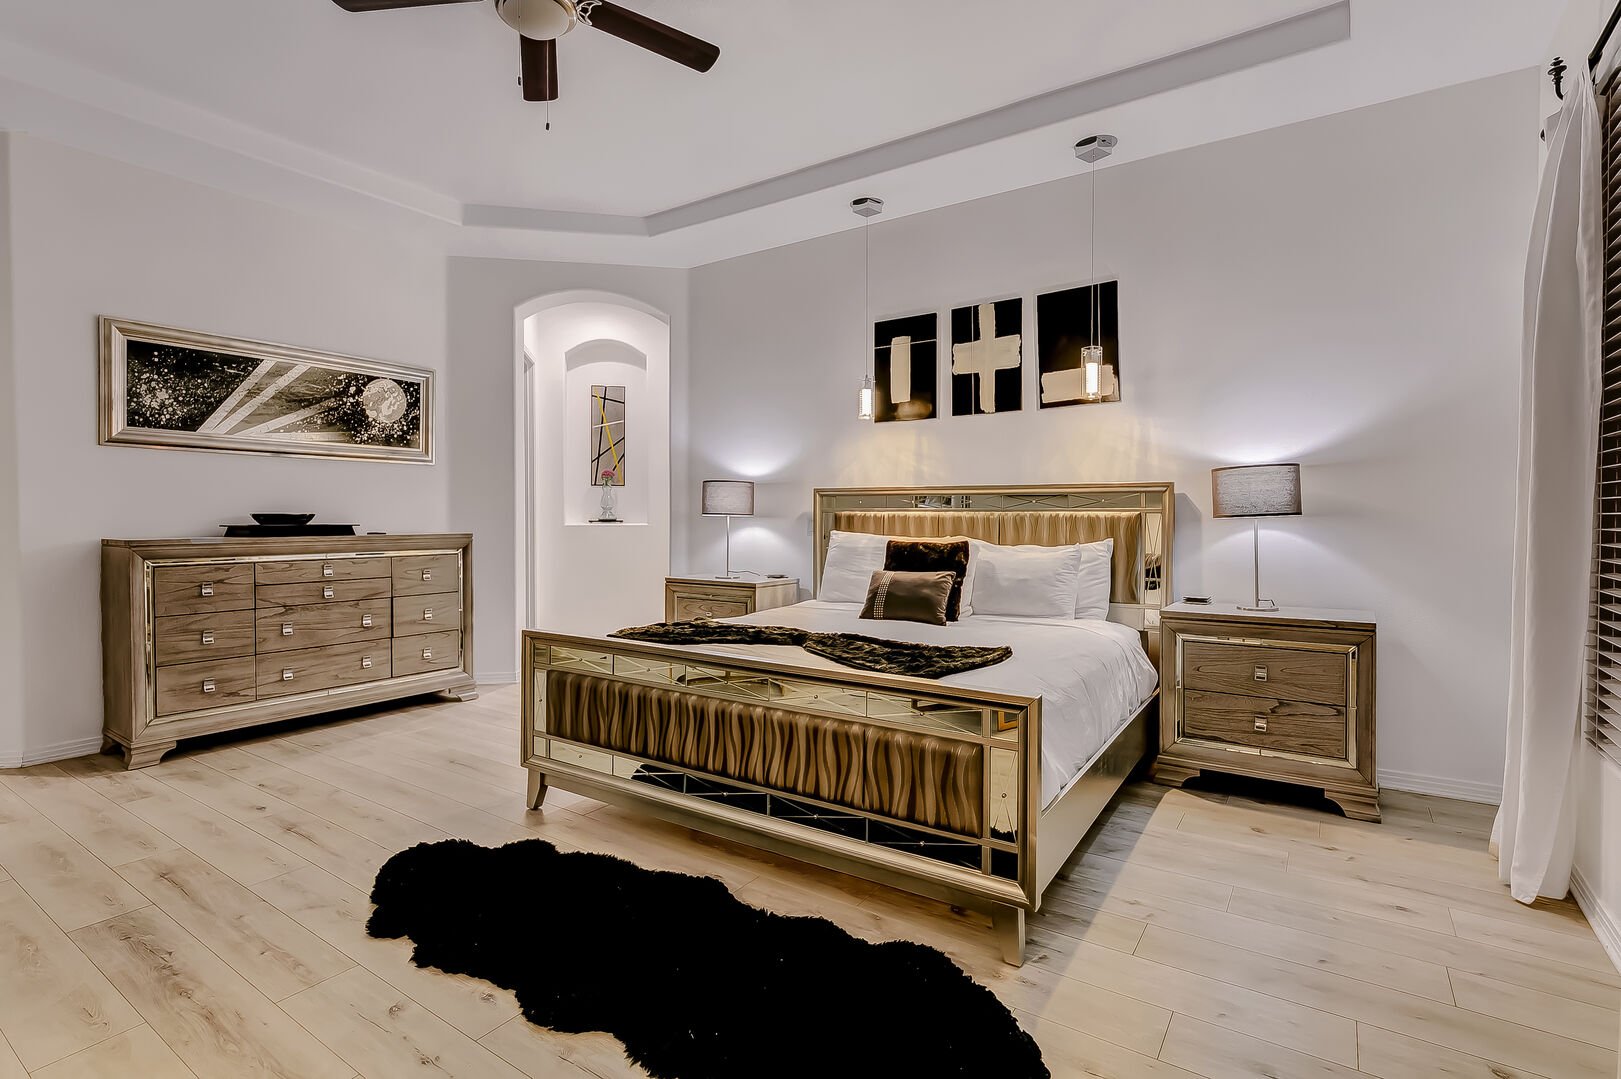 Master bedroom features a king size bed, desk, seating area, large HDTV, and remote-controlled ceiling fan!